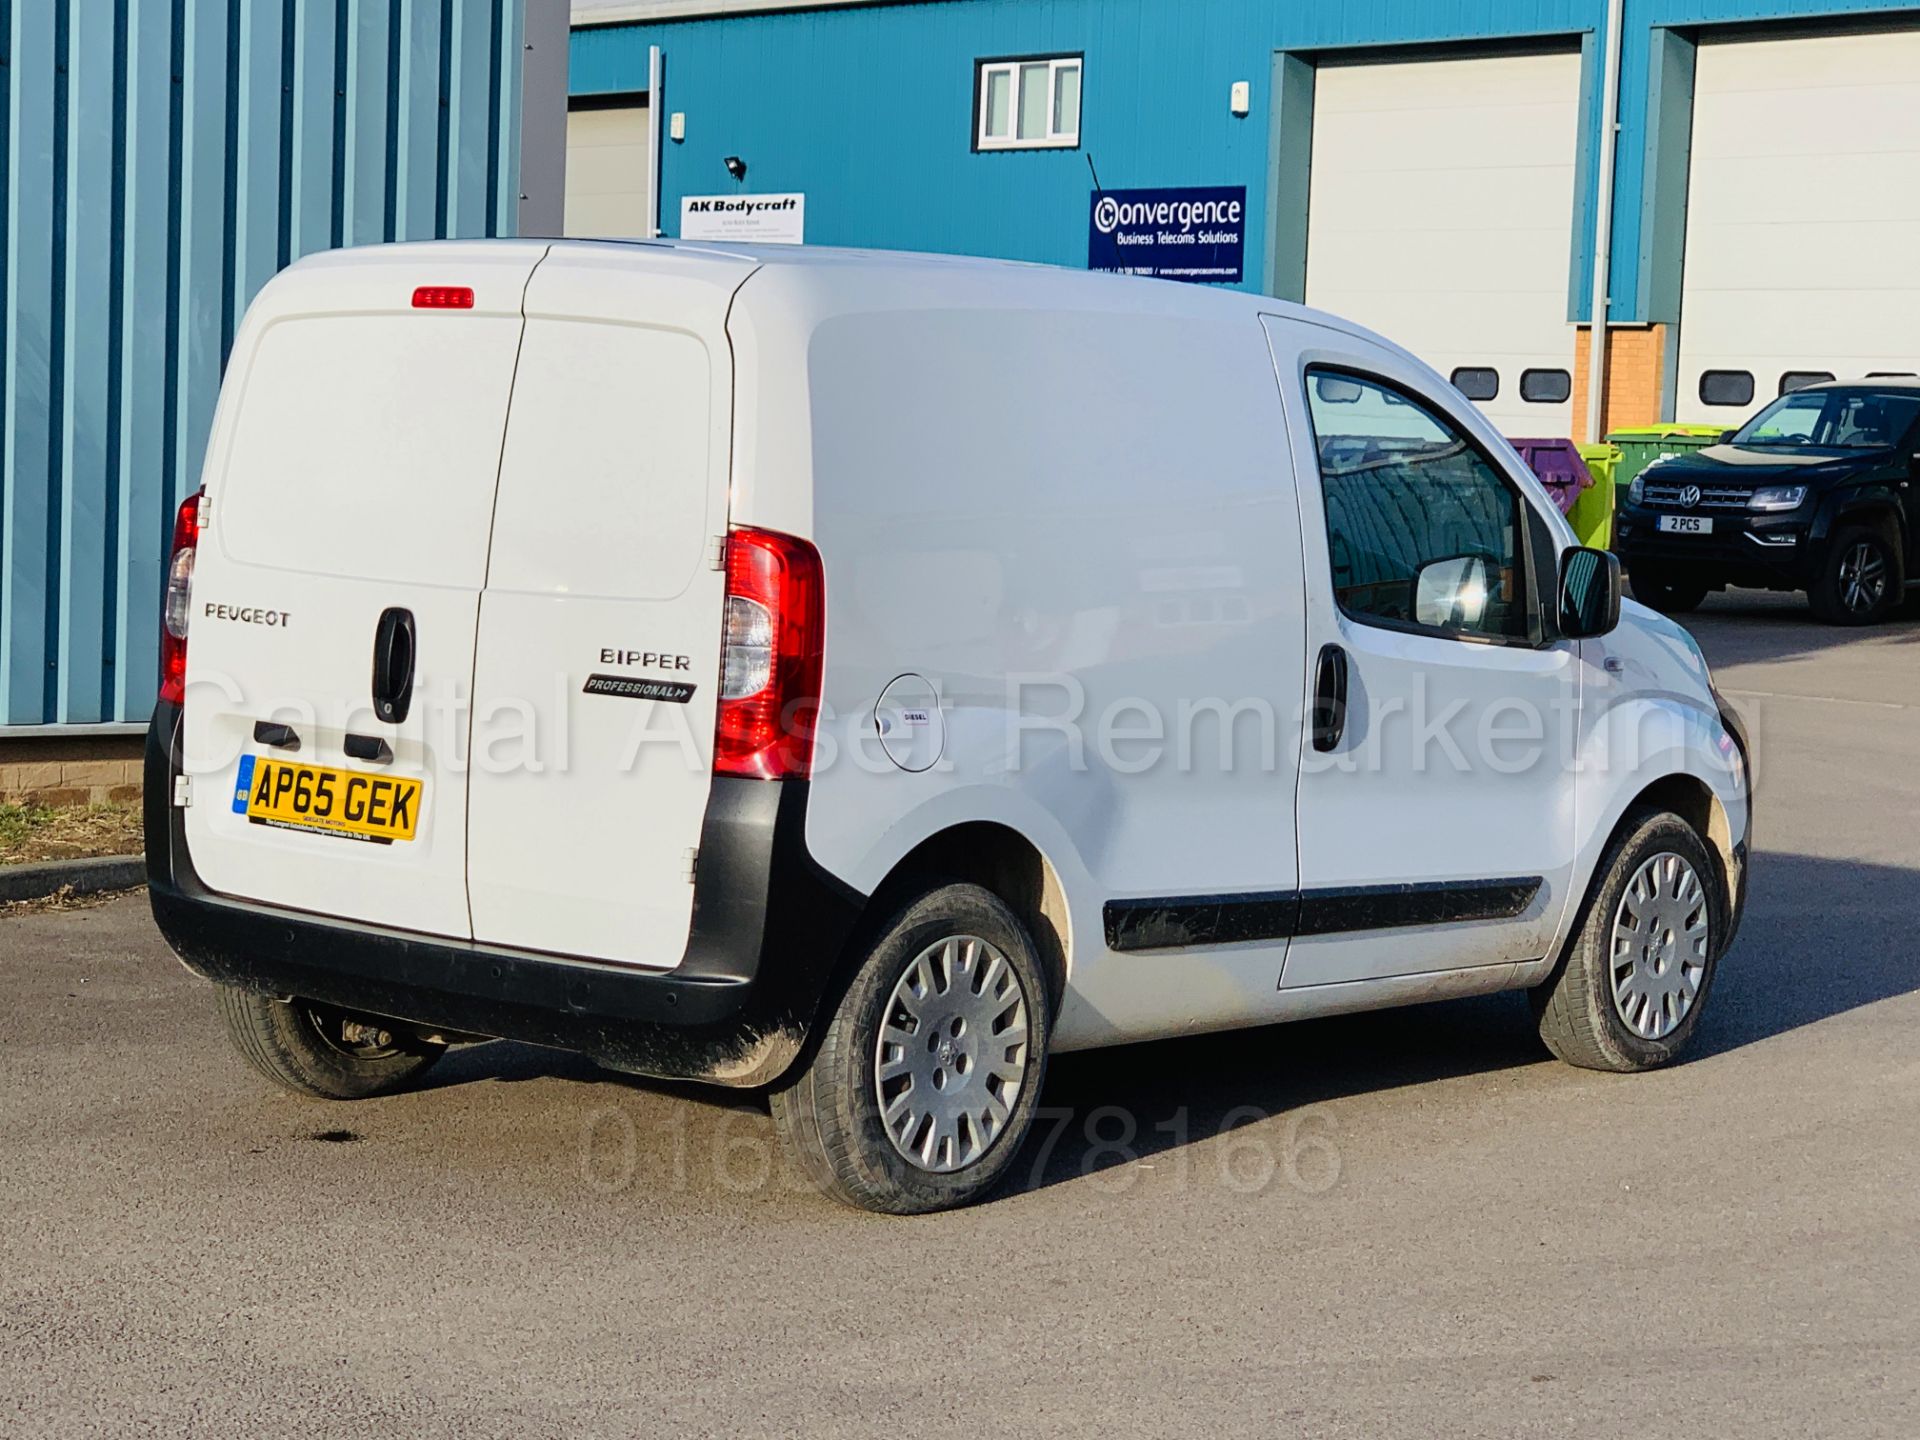 (On Sale) PEUGEOT BIPPER *PROFESSIONAL* LCV - PANEL VAN (65 REG) 'HDI - 5 SPEED' (1 OWNER) *AIR CON* - Image 11 of 36